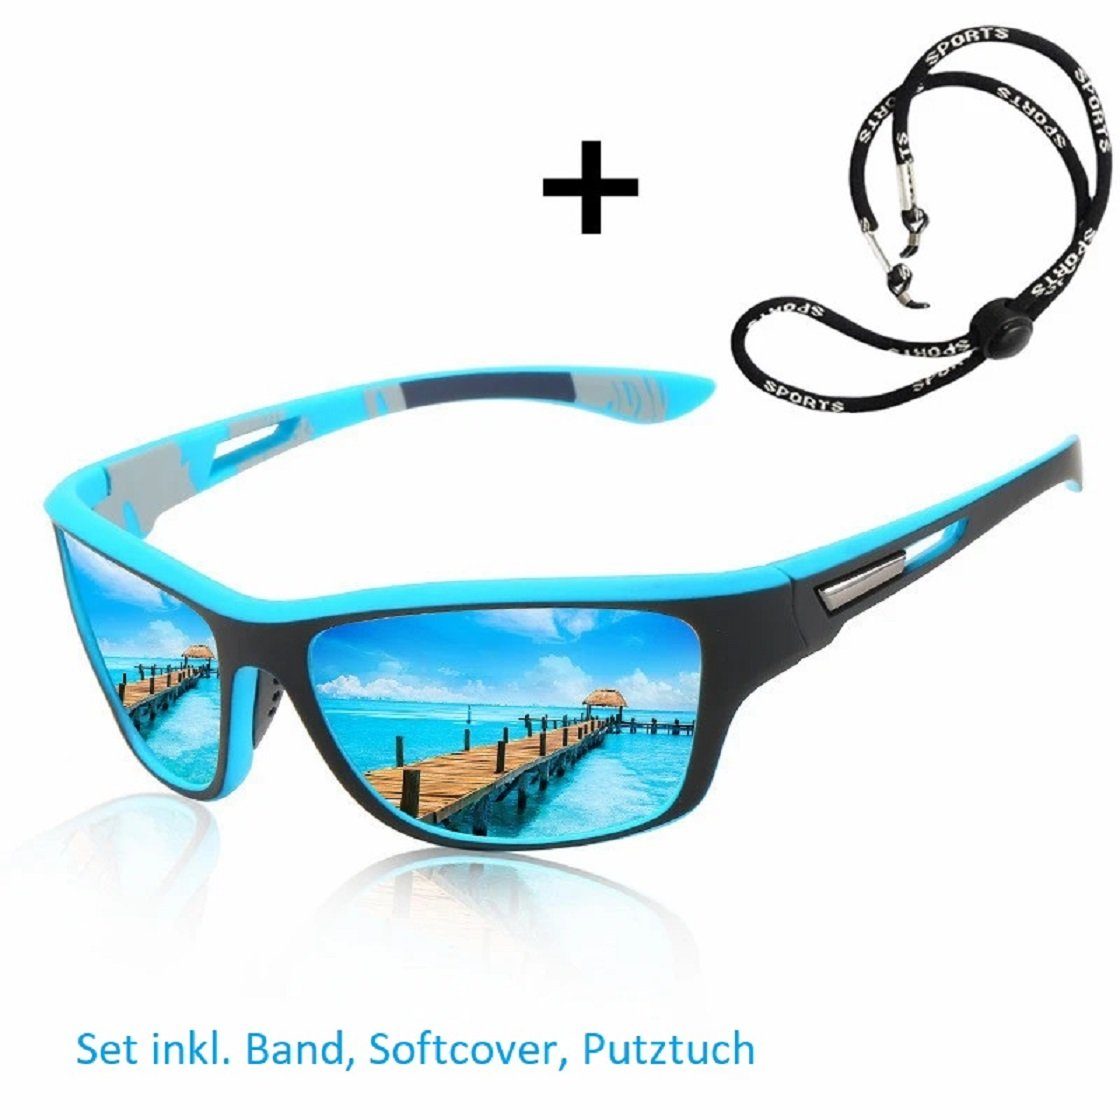 Amy too Sportbrille Brille, Band, Tornado, Softcover, Putztuch